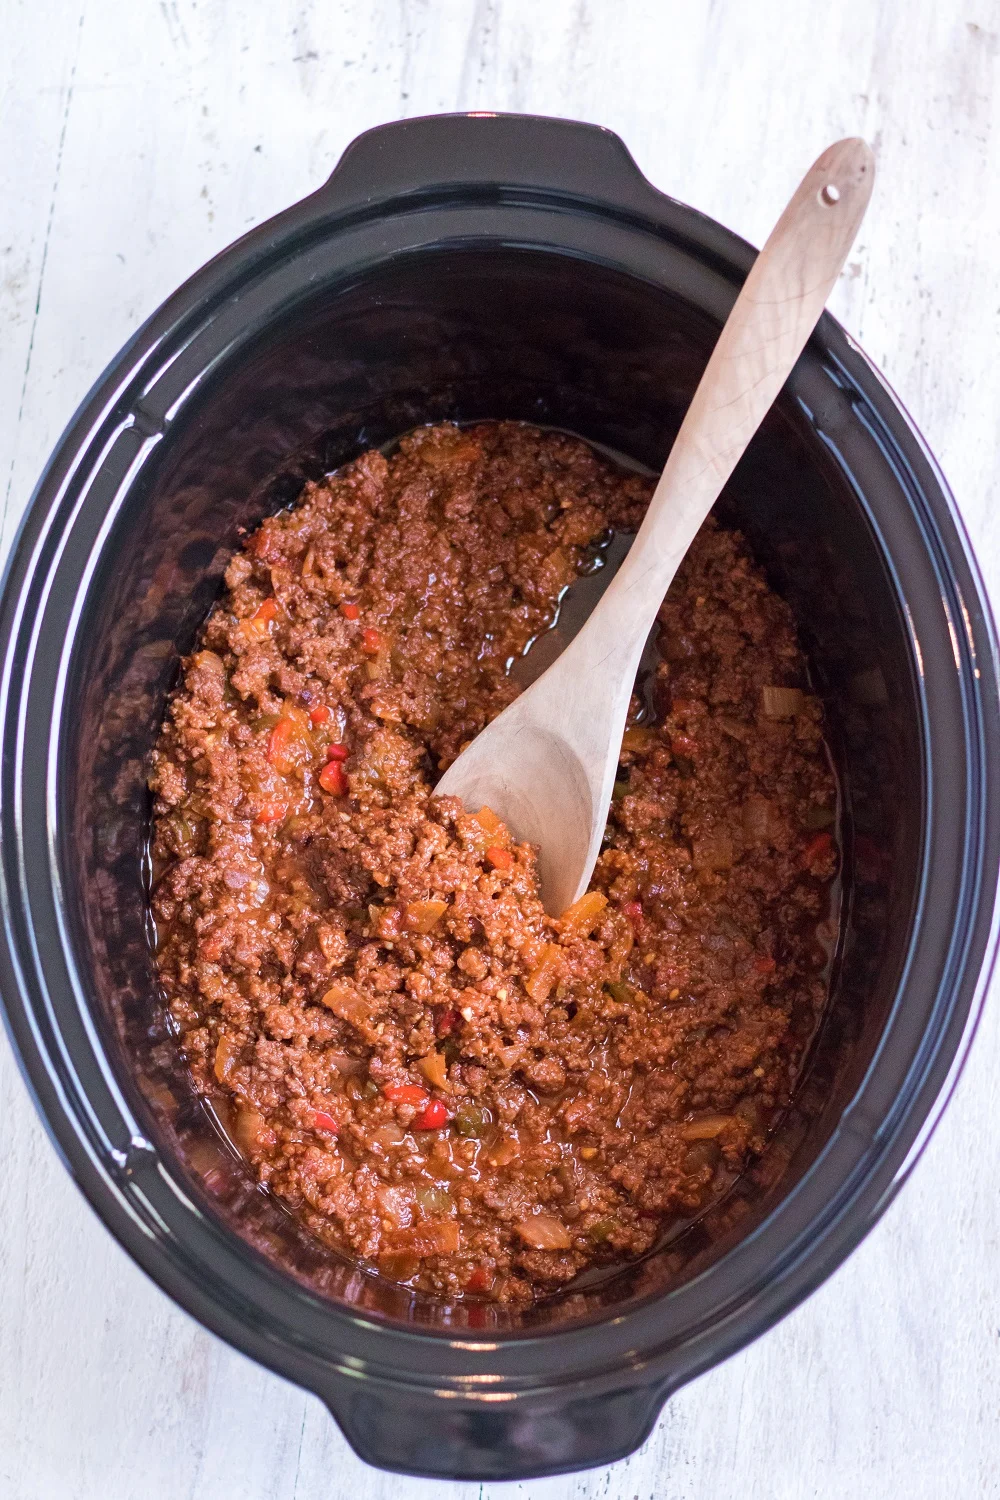 Ingredients cooked in slow cooker for Sloppy Joes